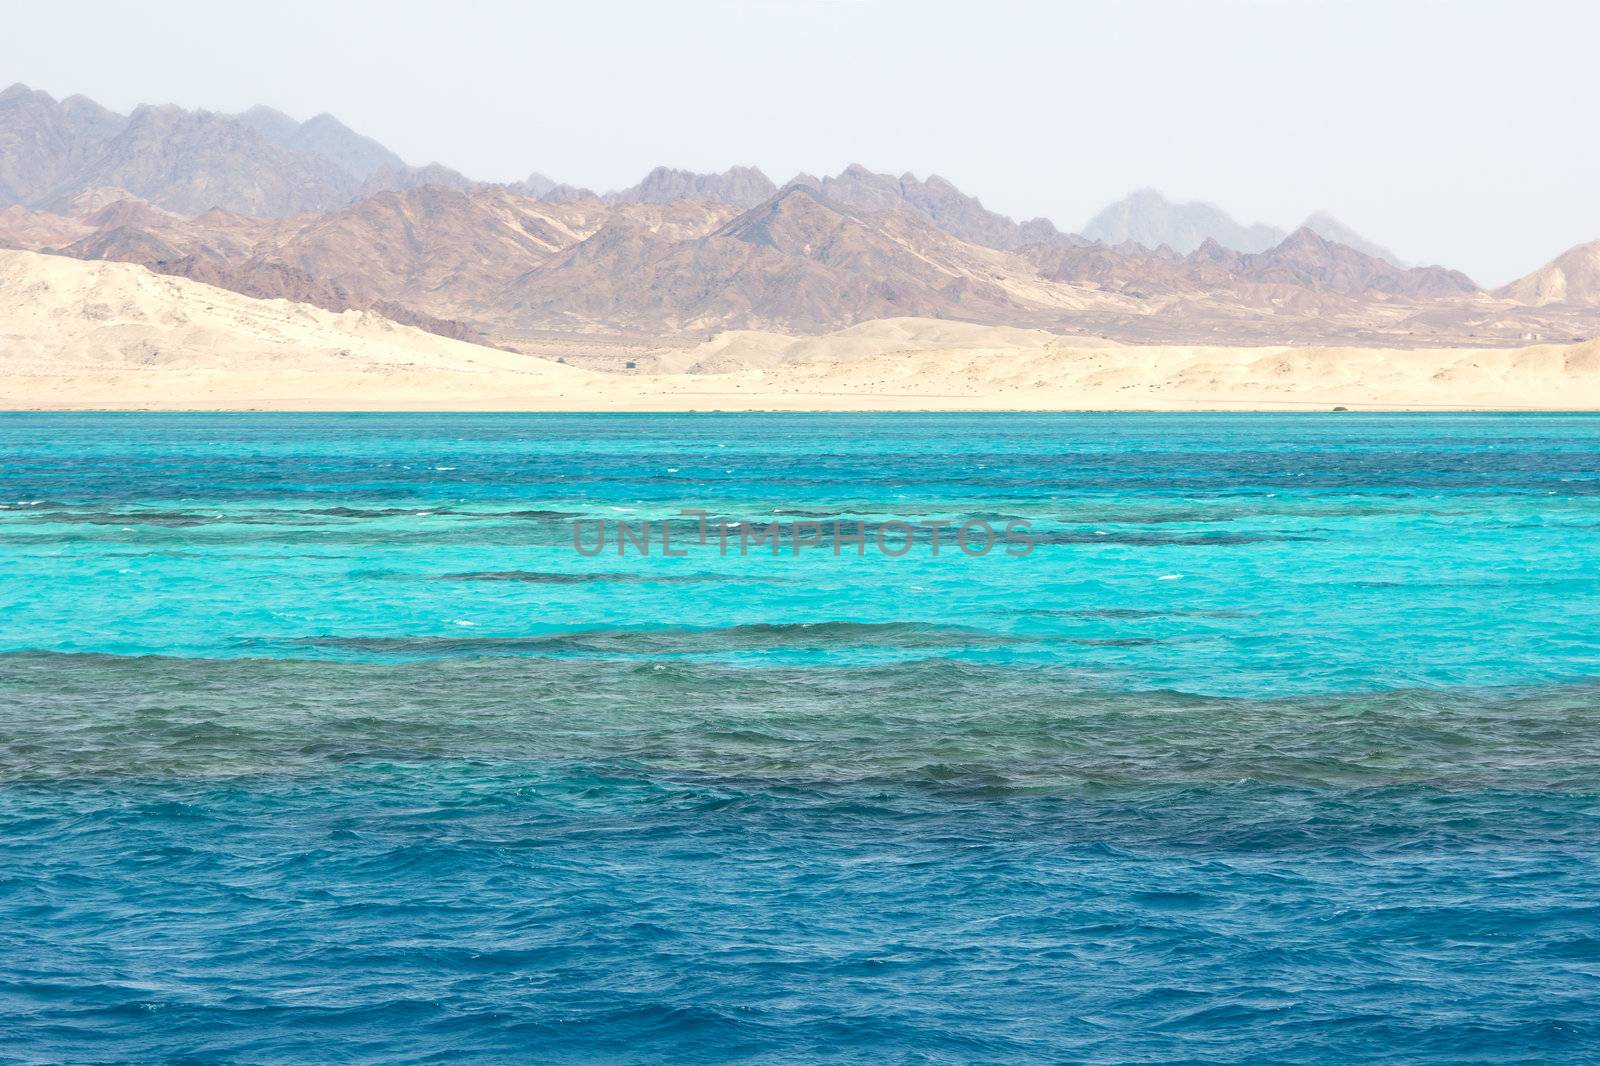 Landscape in Ras Mohammed National Park in the Red Sea with its coral reefs, Egypt.